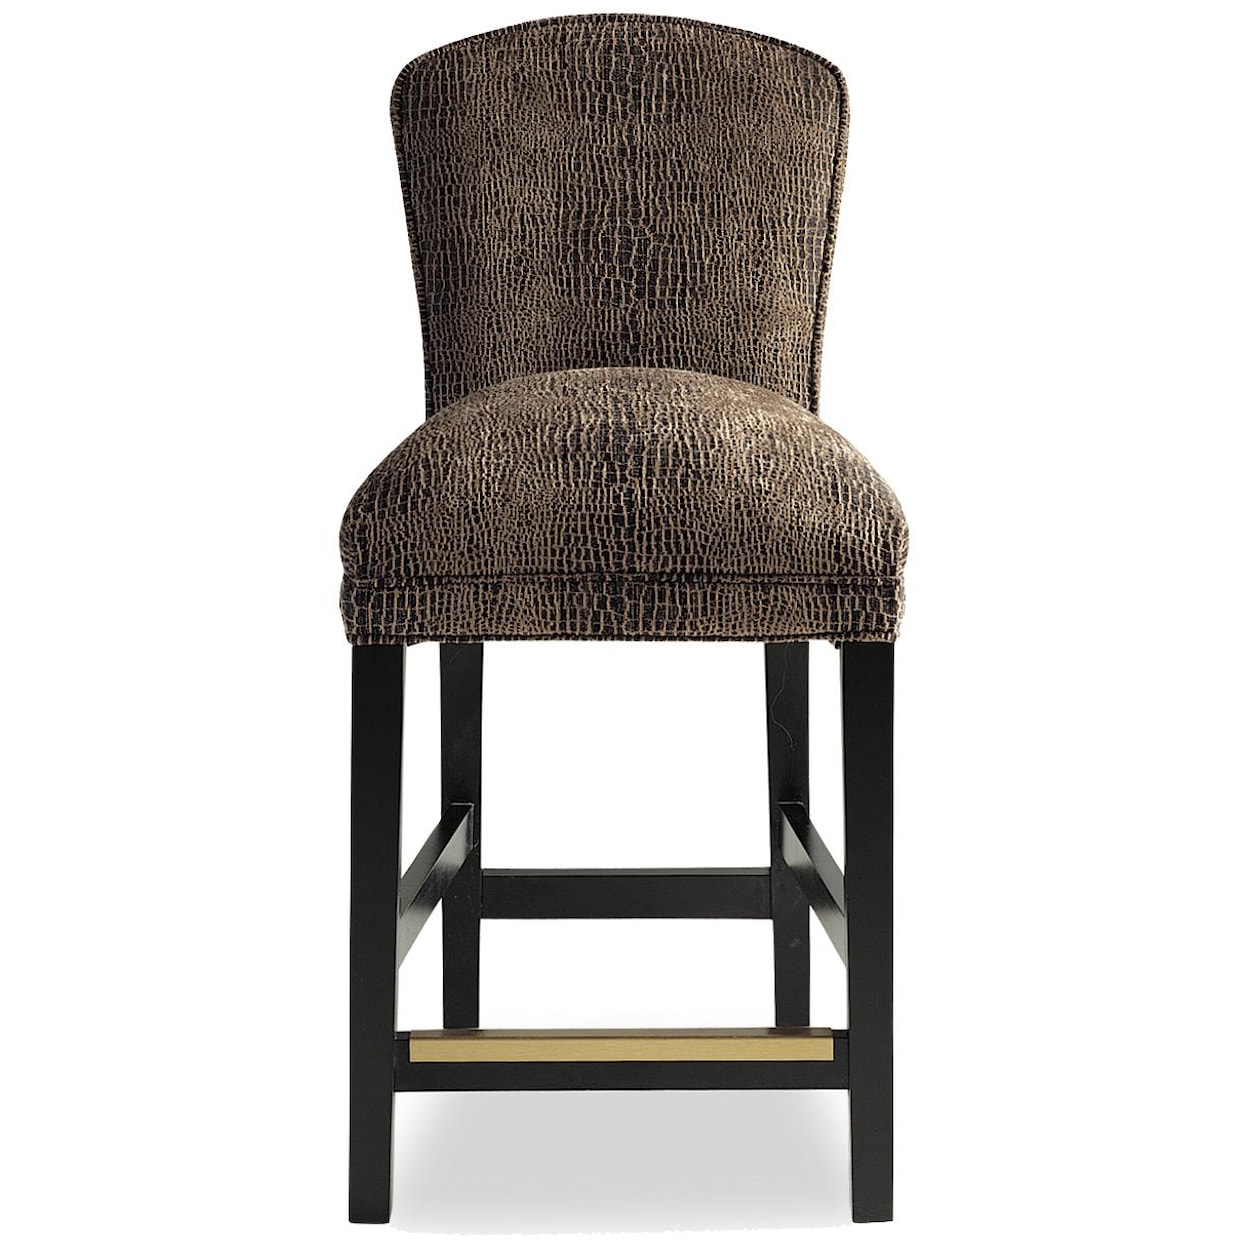 Jessica Charles Fine Upholstered Accents Hattie Memory Swivel Bar Stool